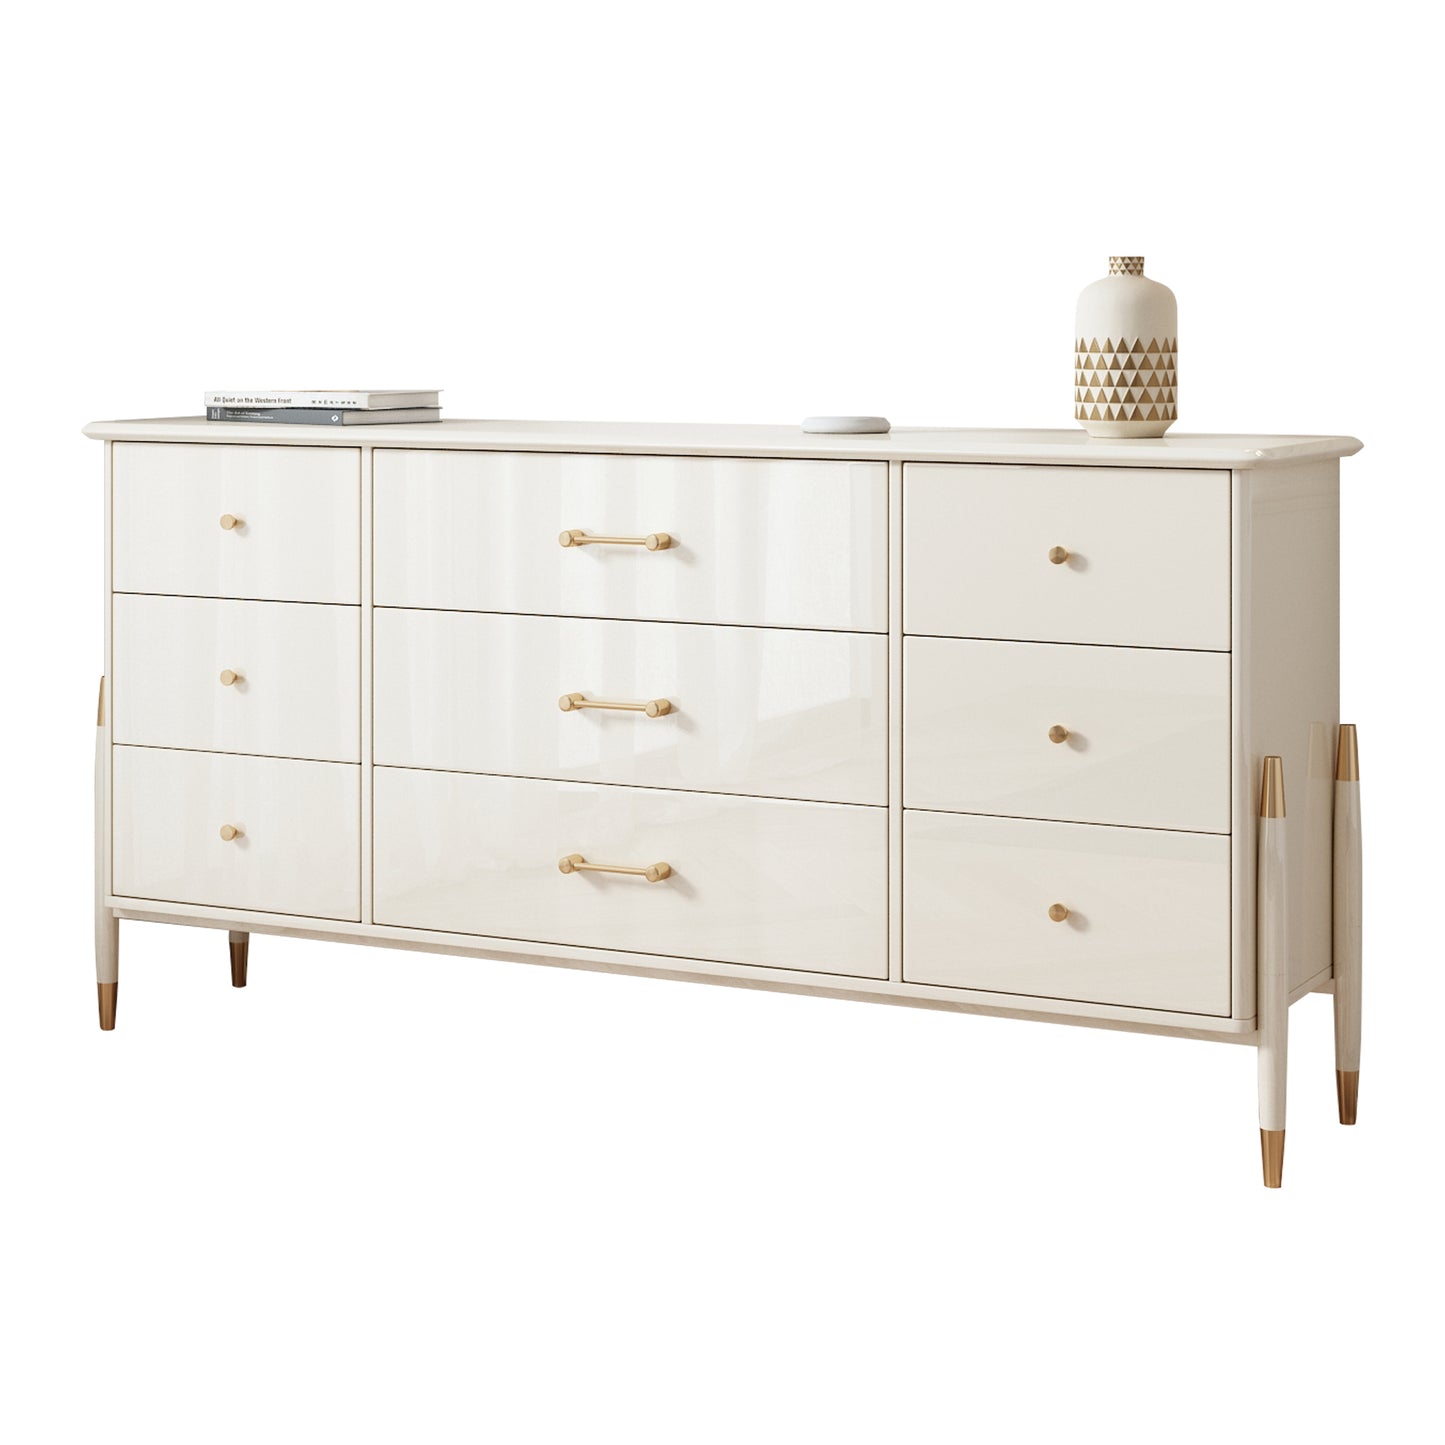 JASIWAY White Storage Cabinet with Drawers